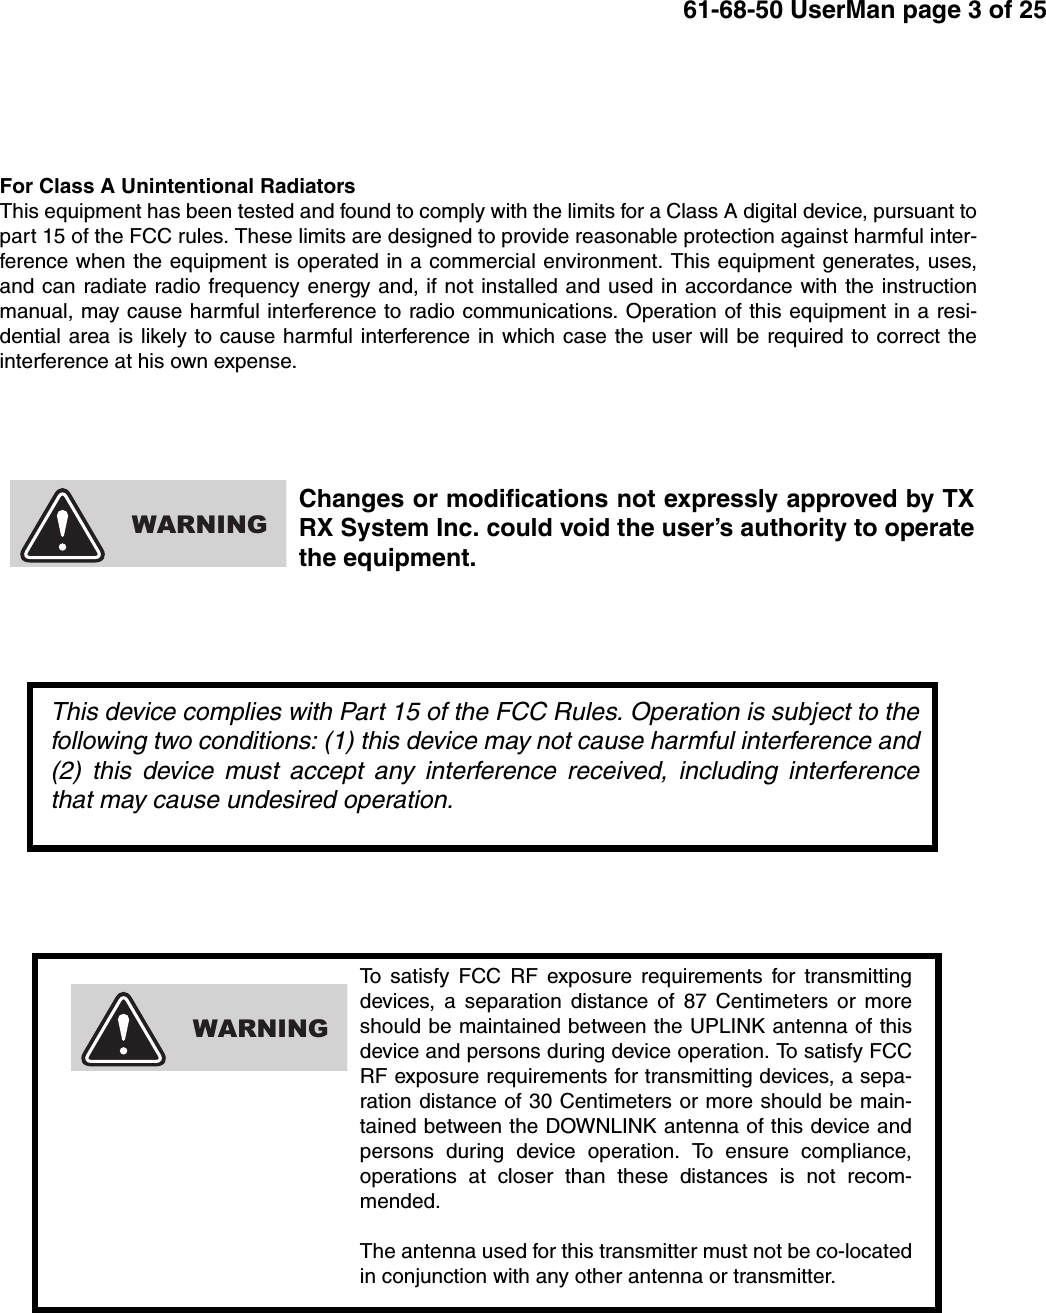 61-68-50 UserMan page 3 of 25To satisfy FCC RF exposure requirements for transmittingdevices, a separation distance of 87 Centimeters or moreshould be maintained between the UPLINK antenna of thisdevice and persons during device operation. To satisfy FCCRF exposure requirements for transmitting devices, a sepa-ration distance of 30 Centimeters or more should be main-tained between the DOWNLINK antenna of this device andpersons during device operation. To ensure compliance,operations at closer than these distances is not recom-mended.The antenna used for this transmitter must not be co-locatedin conjunction with any other antenna or transmitter.WARNINGFor Class A Unintentional RadiatorsThis equipment has been tested and found to comply with the limits for a Class A digital device, pursuant topart 15 of the FCC rules. These limits are designed to provide reasonable protection against harmful inter-ference when the equipment is operated in a commercial environment. This equipment generates, uses,and can radiate radio frequency energy and, if not installed and used in accordance with the instructionmanual, may cause harmful interference to radio communications. Operation of this equipment in a resi-dential area is likely to cause harmful interference in which case the user will be required to correct theinterference at his own expense.Changes or modifications not expressly approved by TXRX System Inc. could void the user’s authority to operatethe equipment.WARNINGThis device complies with Part 15 of the FCC Rules. Operation is subject to thefollowing two conditions: (1) this device may not cause harmful interference and(2) this device must accept any interference received, including interferencethat may cause undesired operation.